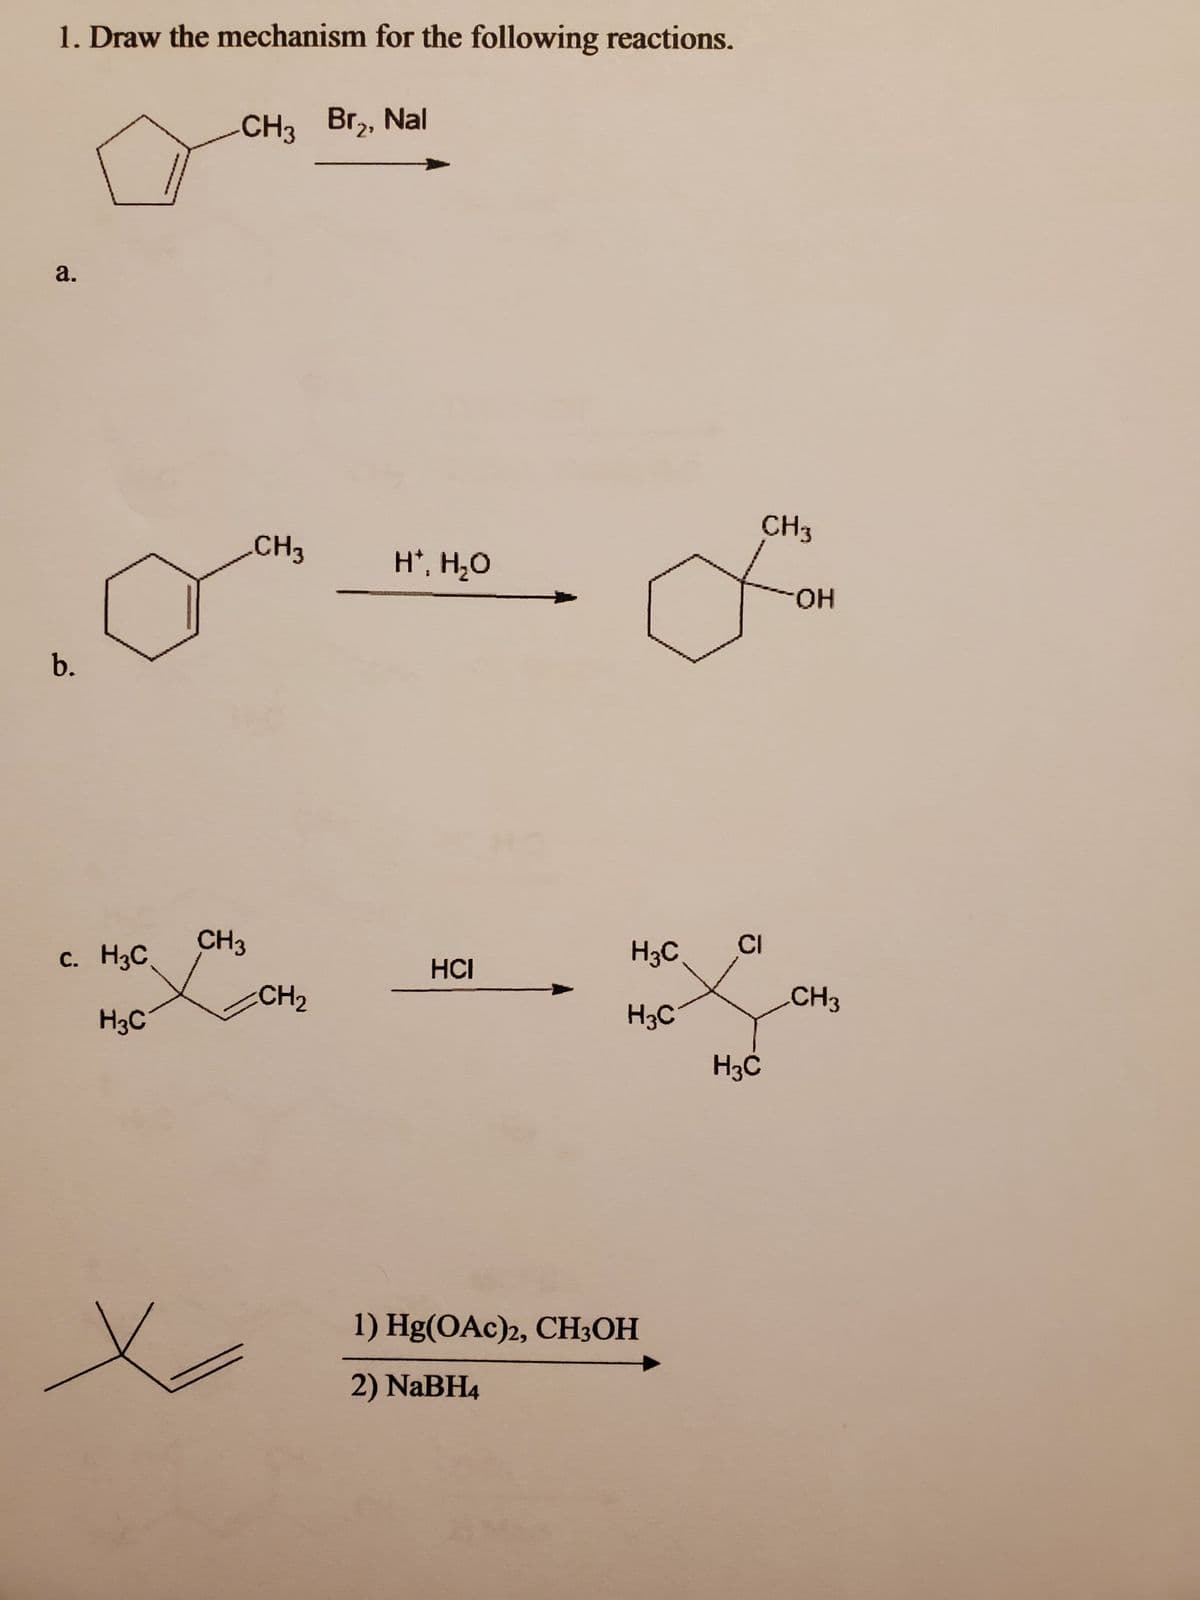 1. Draw the mechanism for the following reactions.
-CH3 Br₂, Nal
а.
b.
c. HC
H3C
CH3
CH3
CH₂
х
H. H2O
HCI
H3C
H3C
1) Hg(OAc)2, CH3OH
2) NaBH4
CH3
CI
H3C
OH
CH3